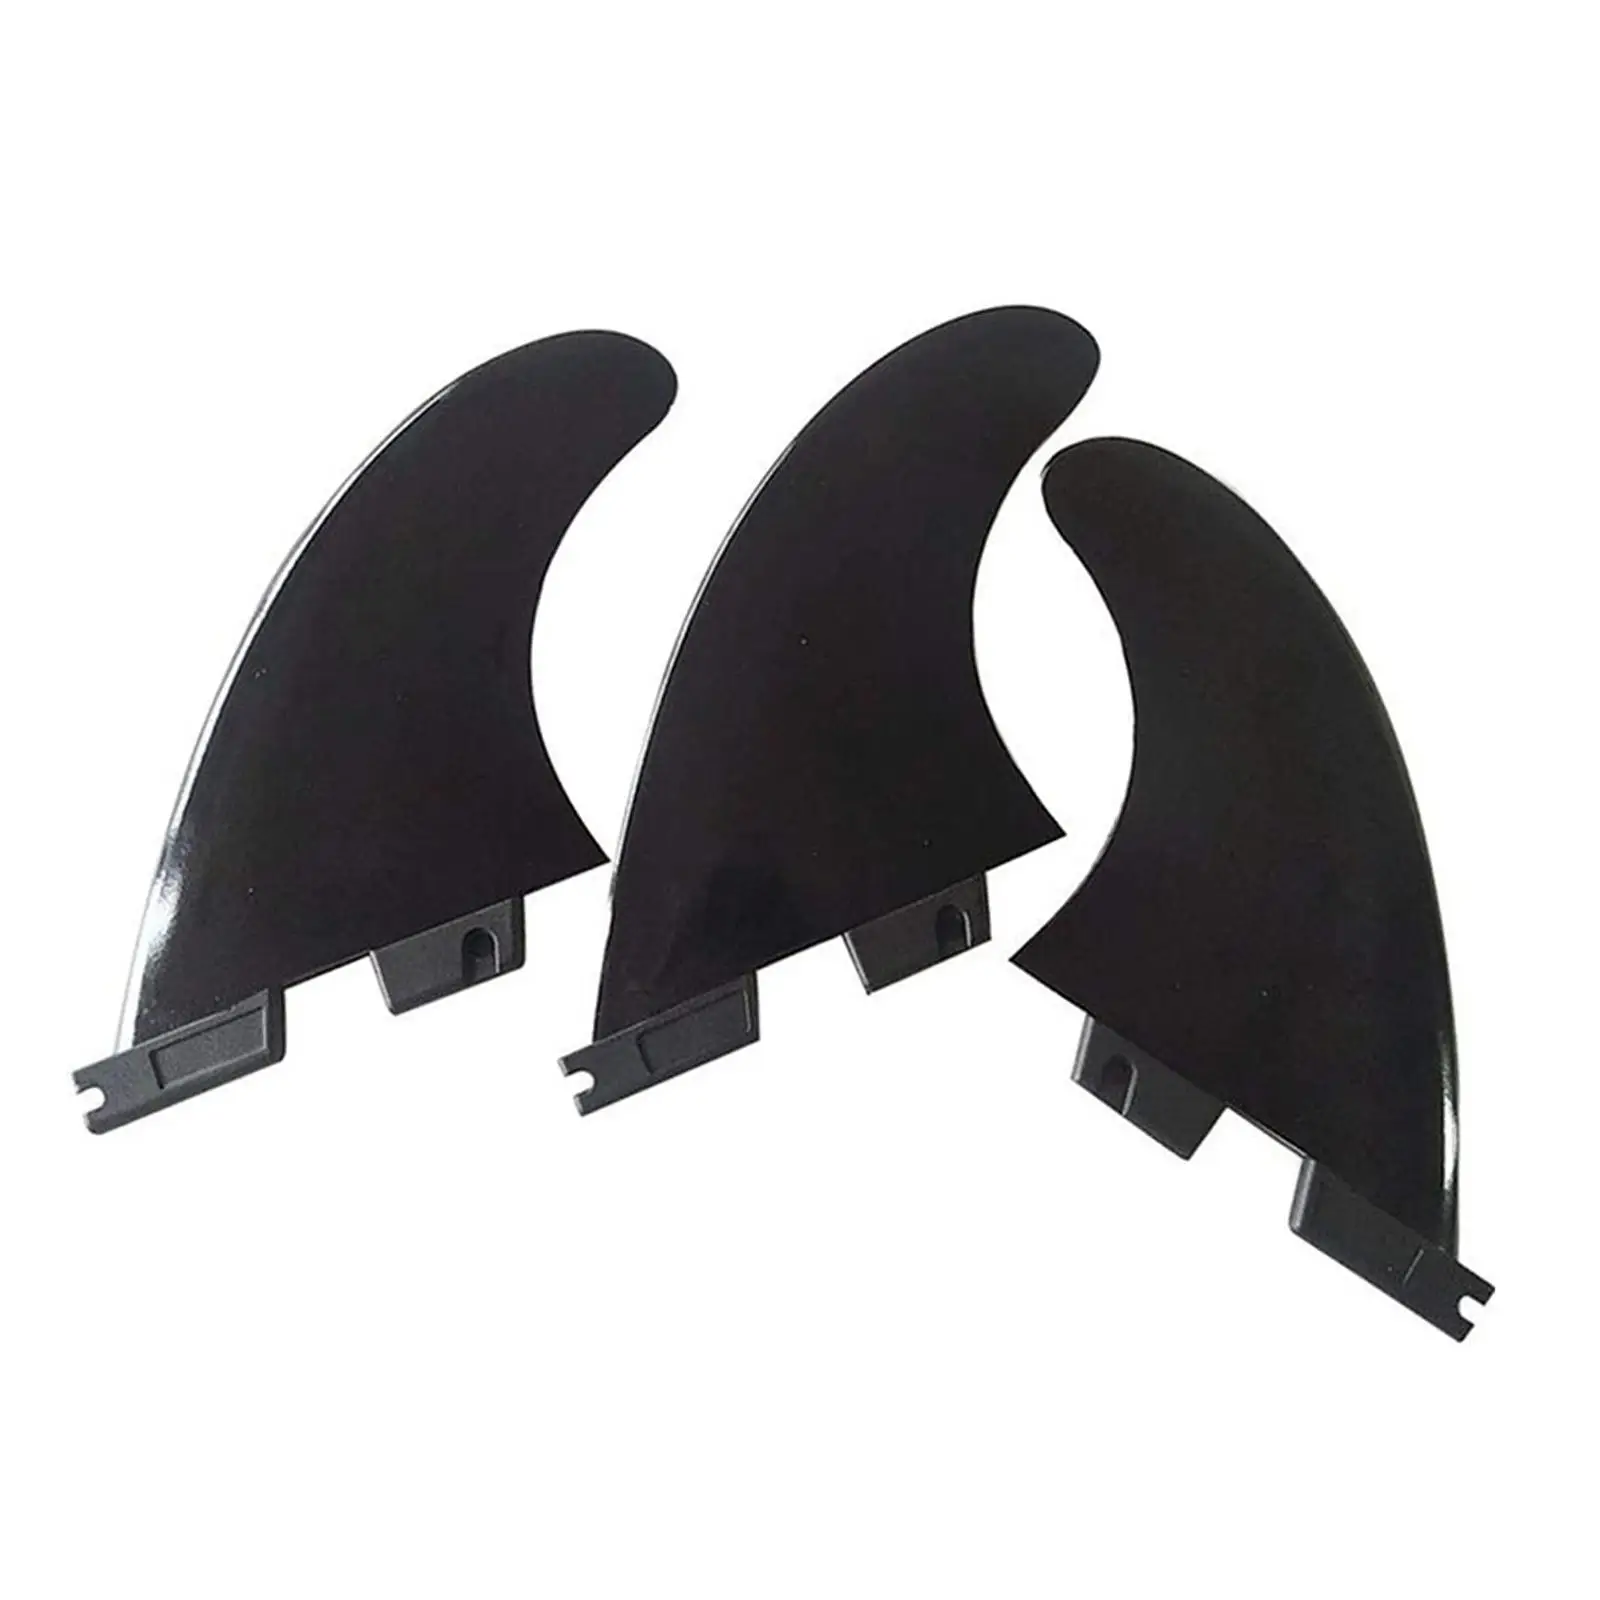 3Pcs Surfboard Fins Surfboard Tail Rudder Longboard Center Fin for Water Sports Surfing Boards Boat Stand up Paddleboard Repair